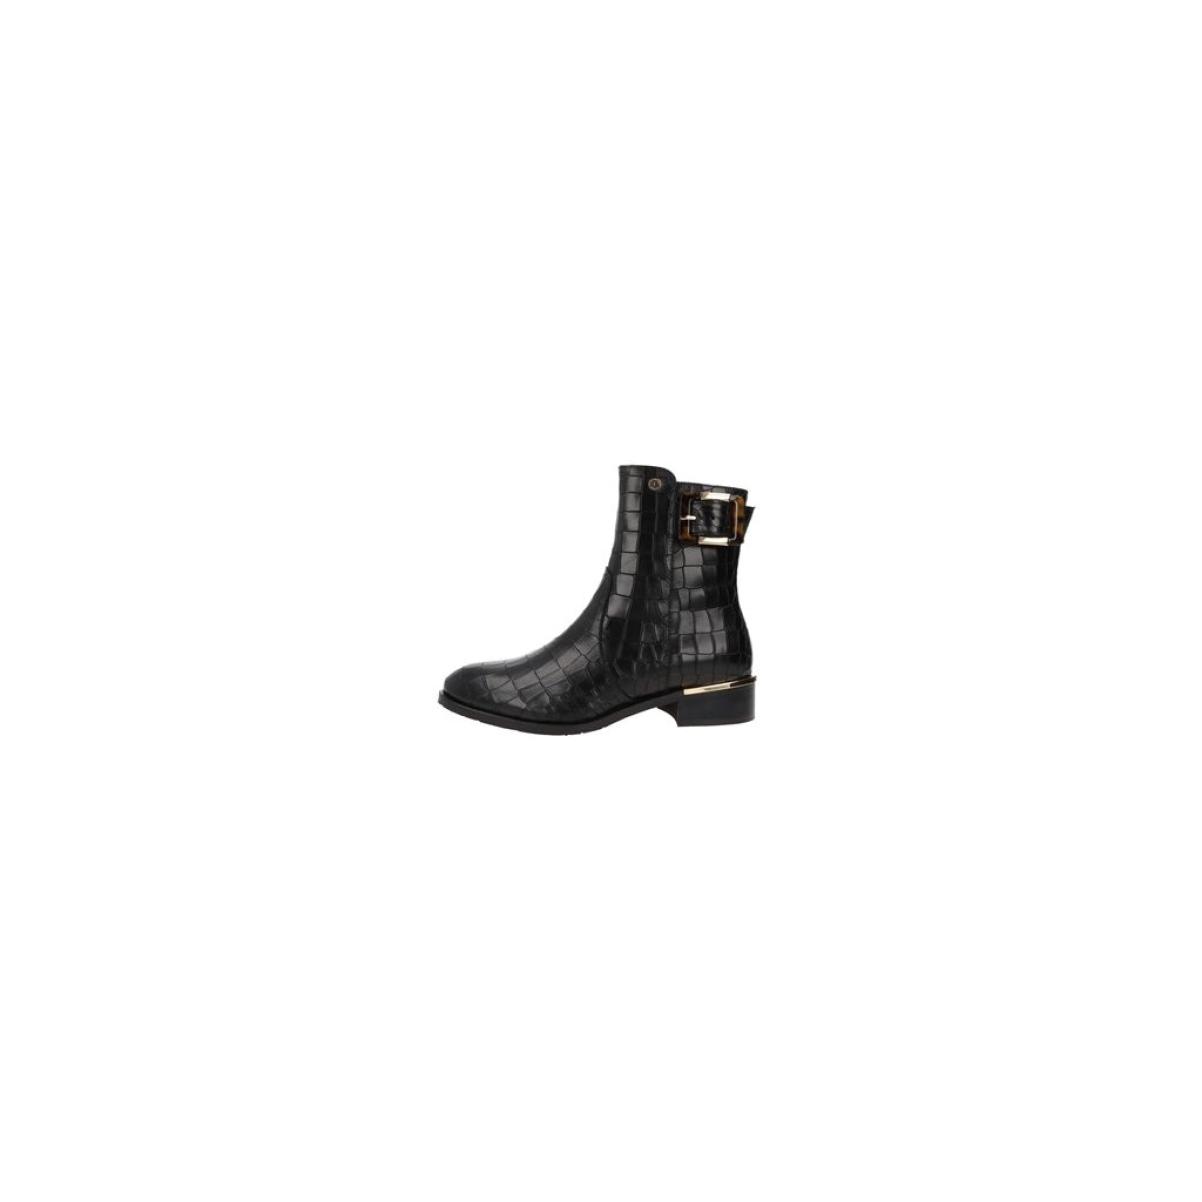 Women Ankle Boots You Can Fly - Black Natural Copenhagen Shoes - 1